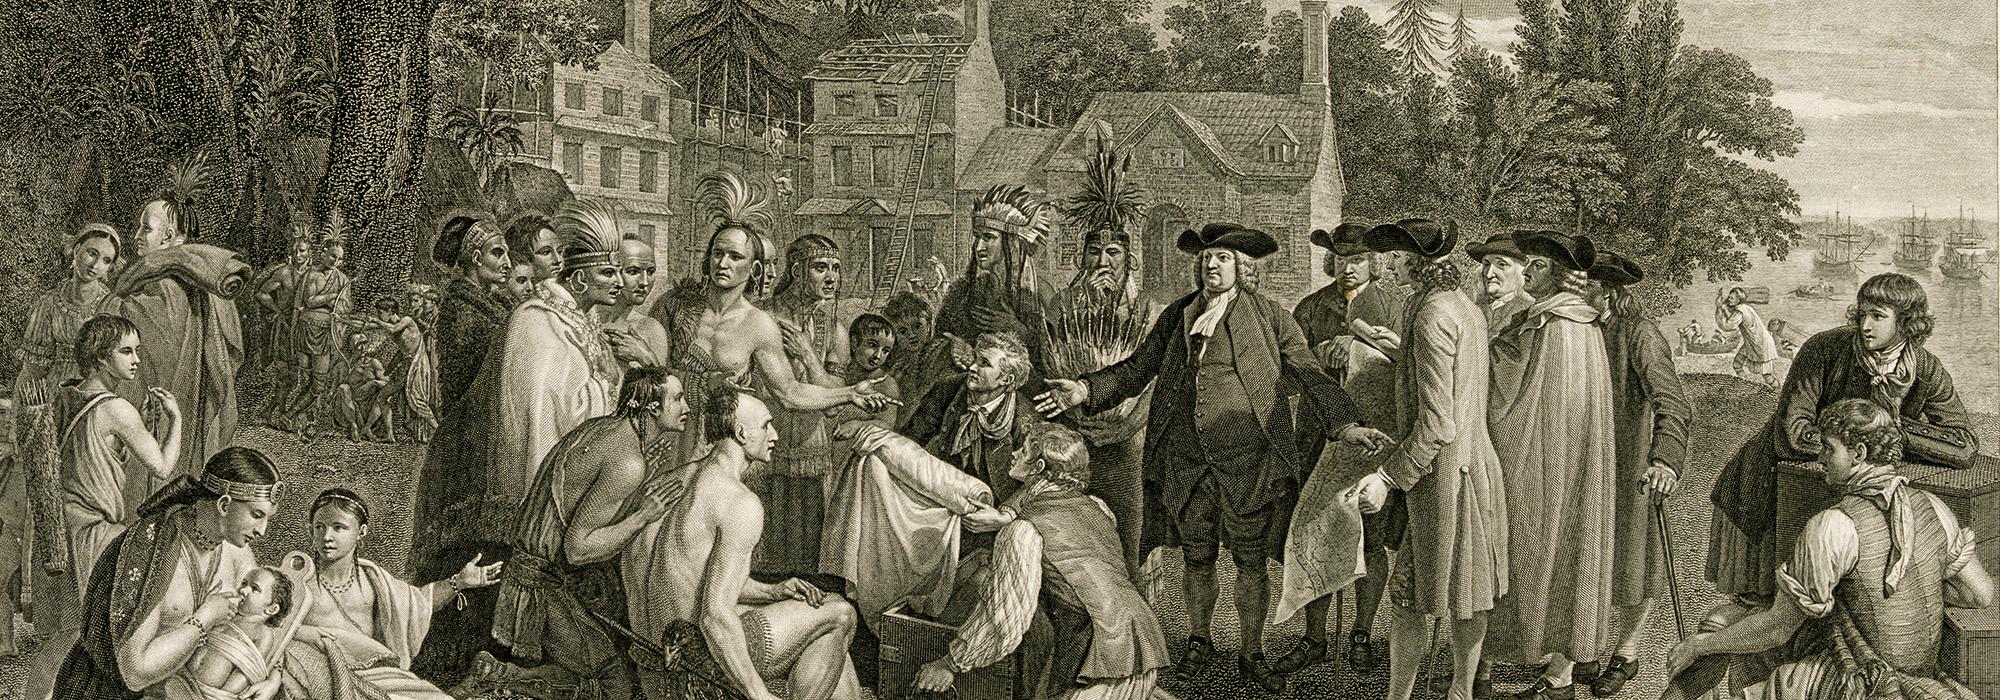 William Penn's treaty with the Indians, when he founded the province of Pennsylvania in North America 1681